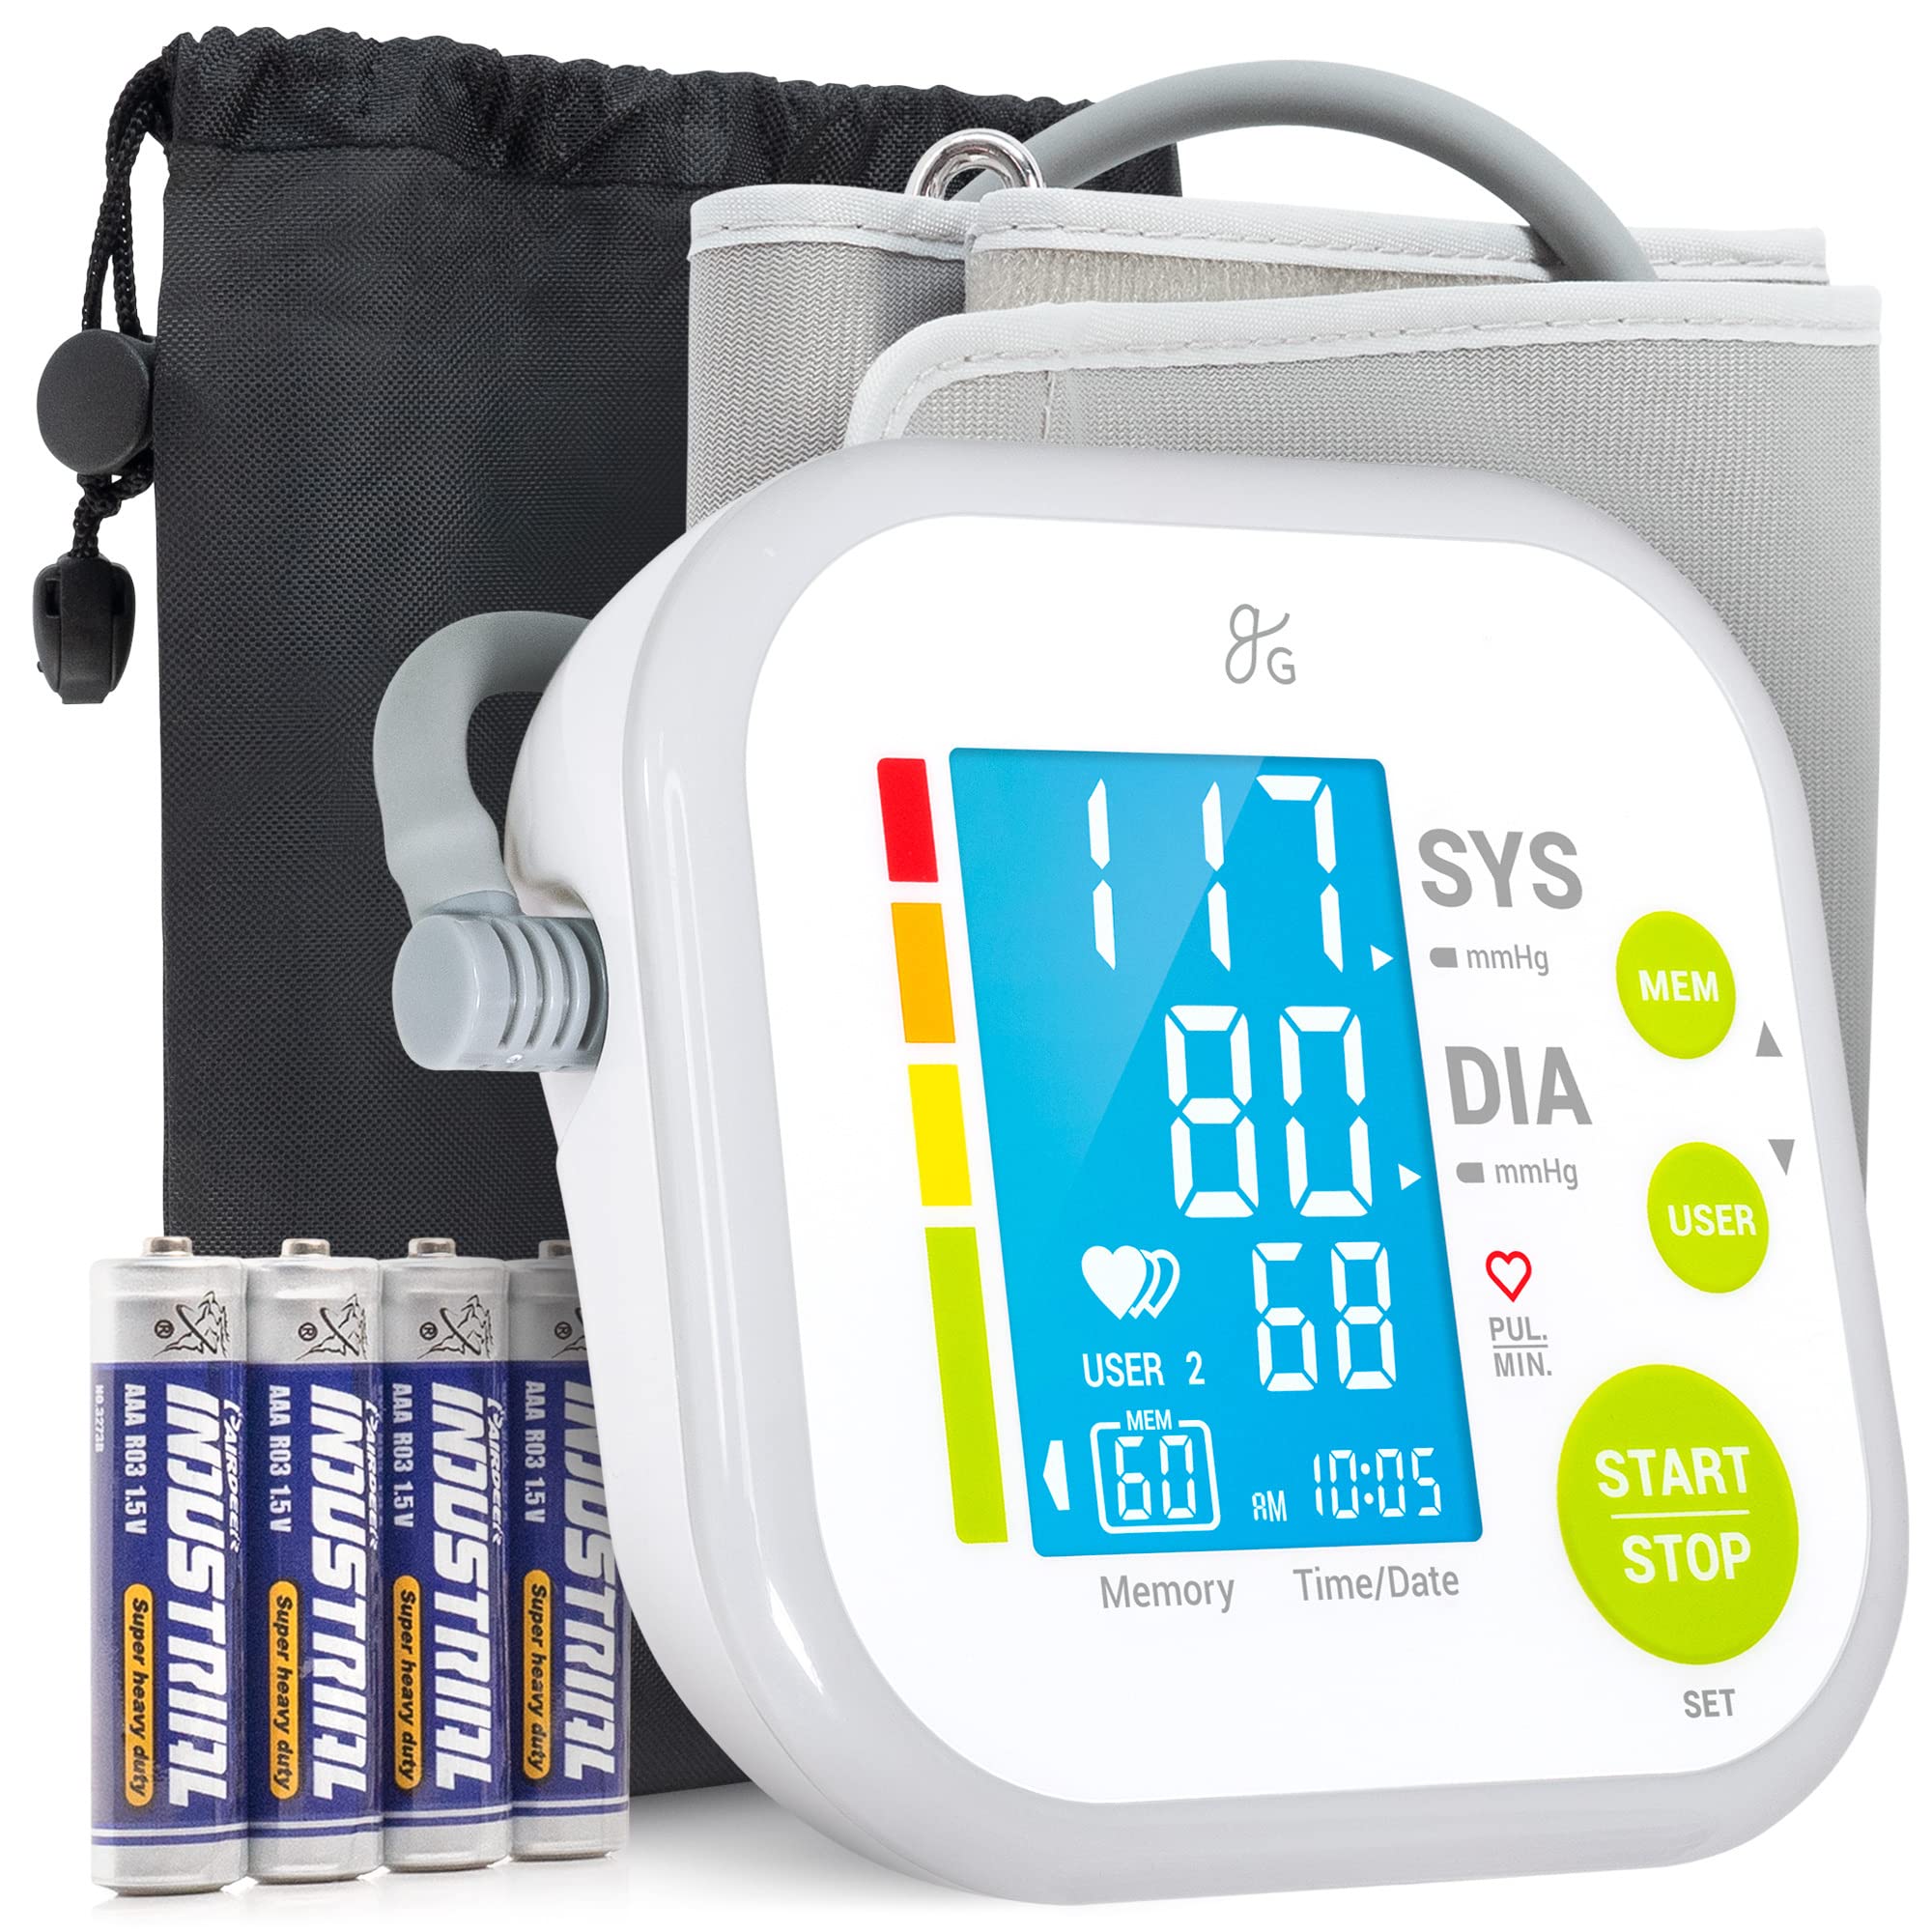 Blood Pressure monitor w 27.7K ratings recommended by Prevention.com sale at Amazon $24.88